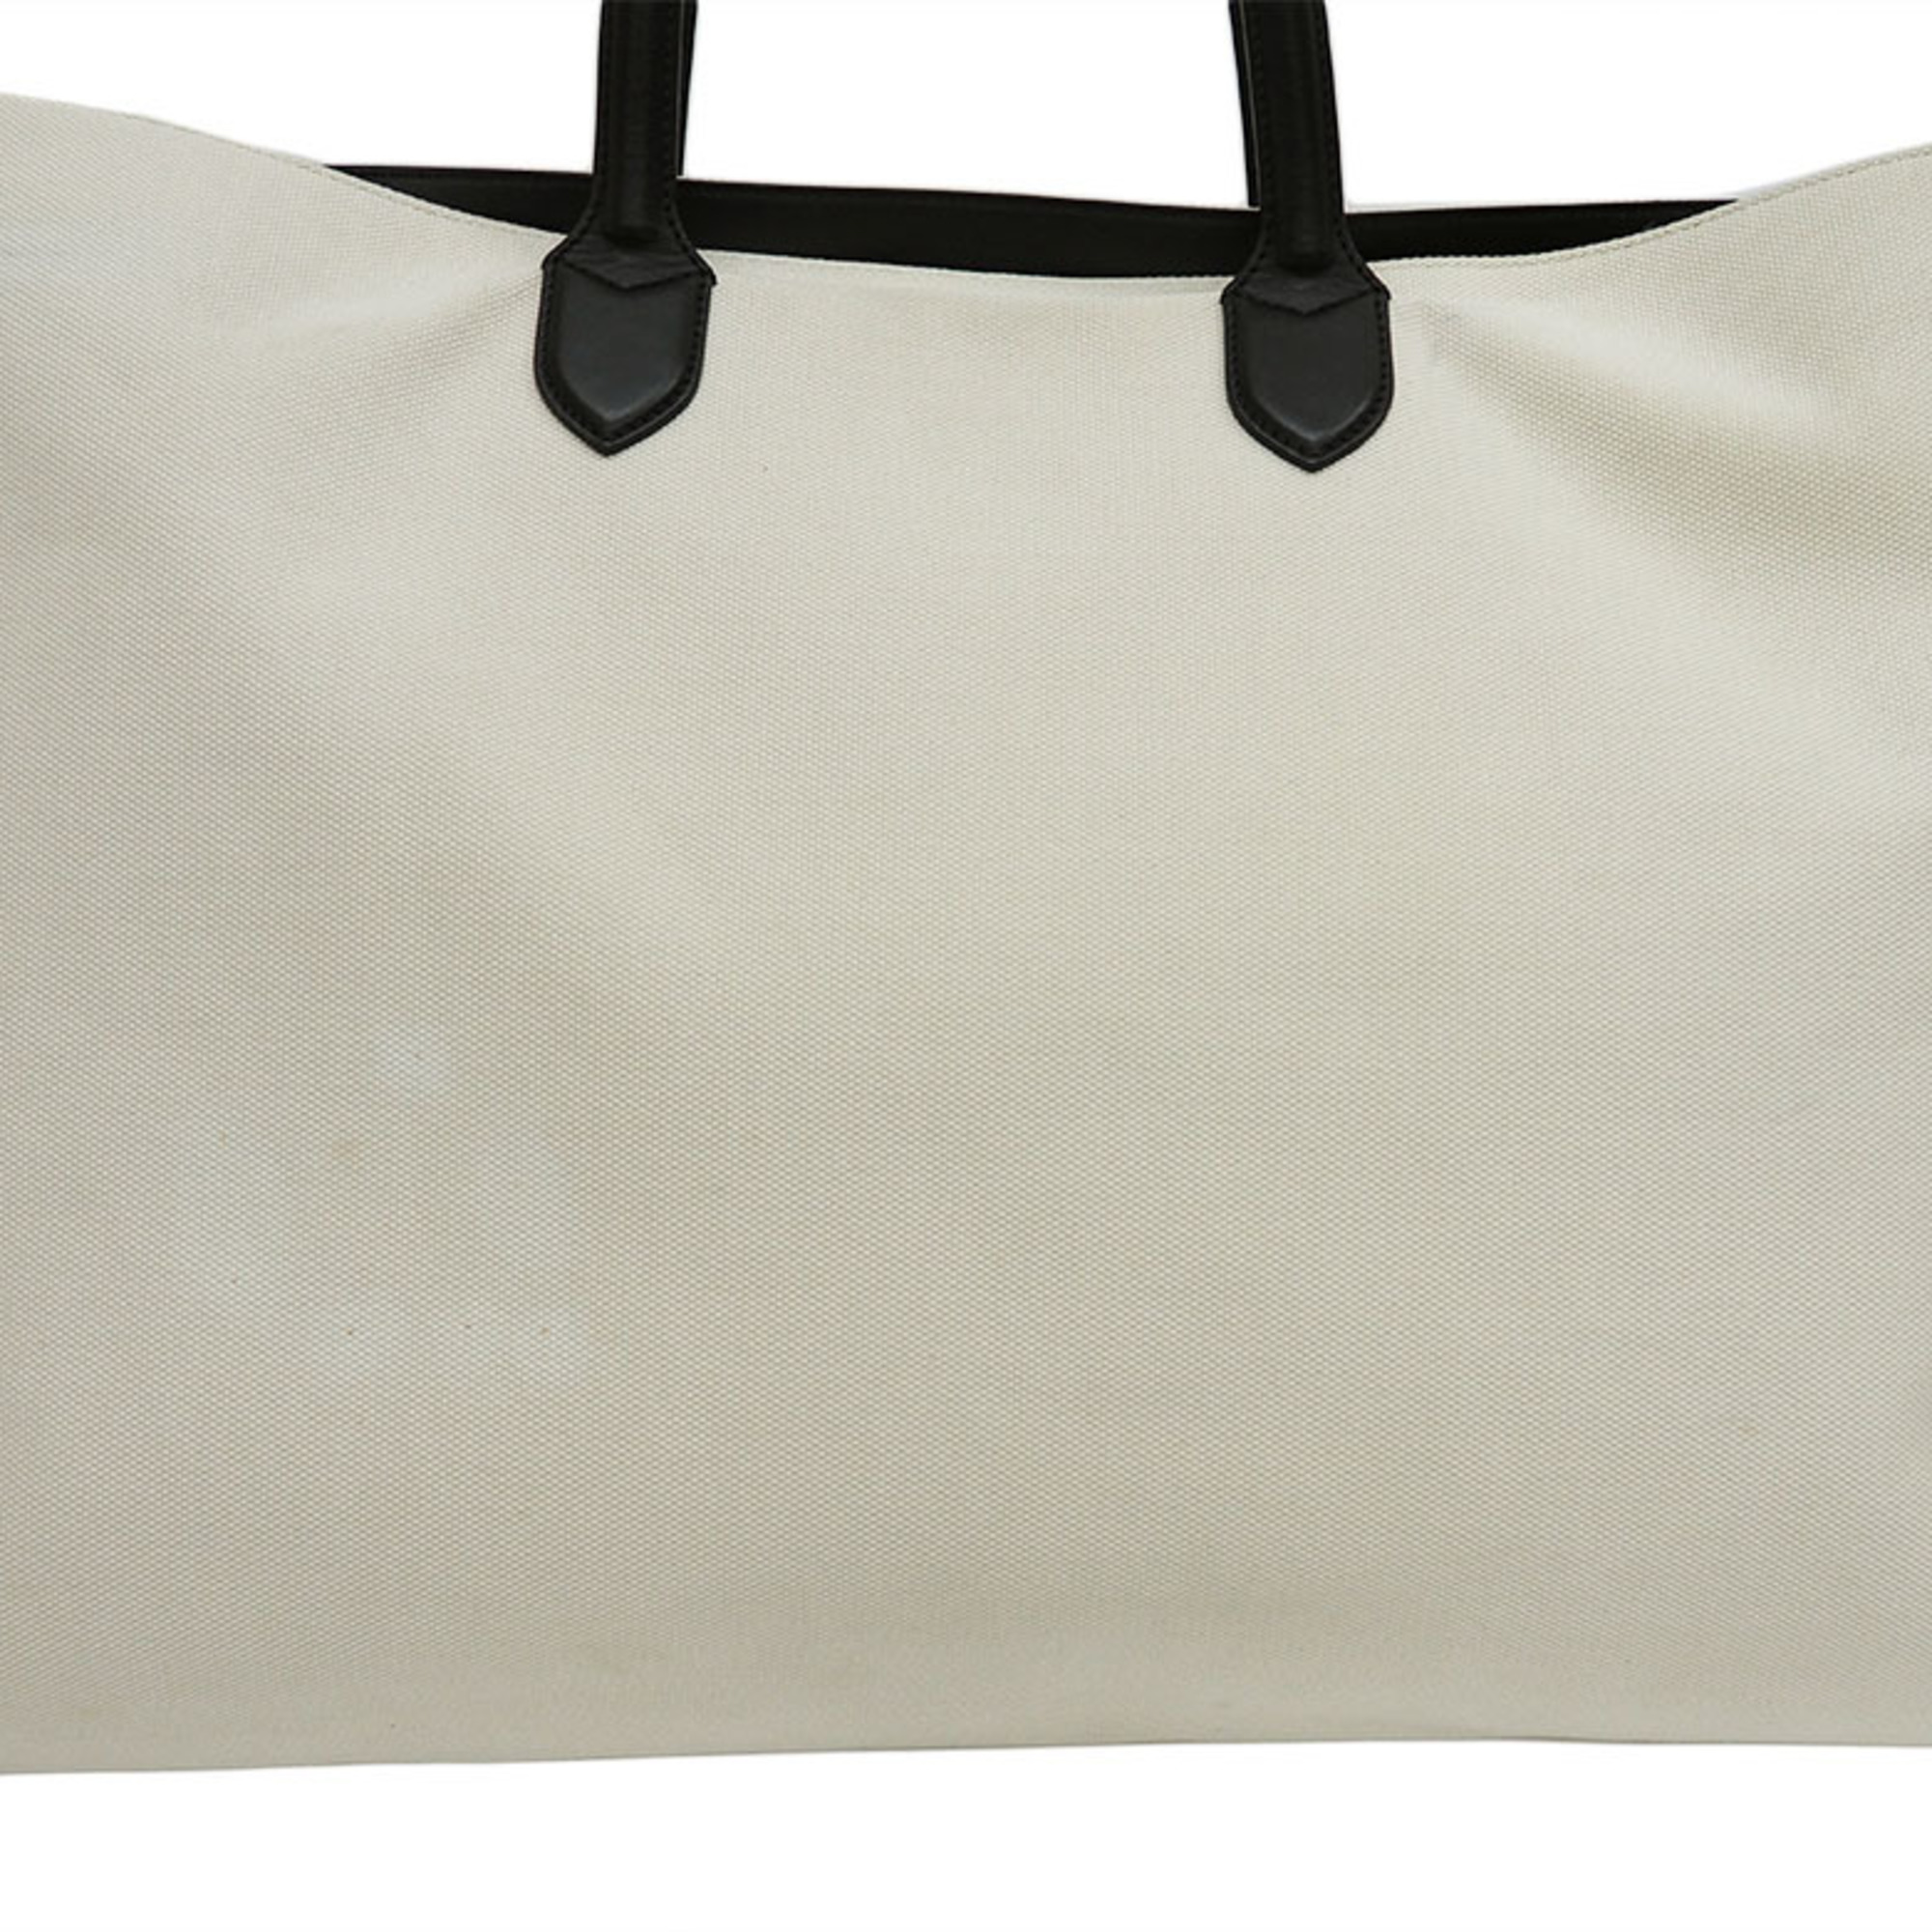 Burberry Logo Canvas Tote Bag Large Natural (Off White) Women's BURBERRY